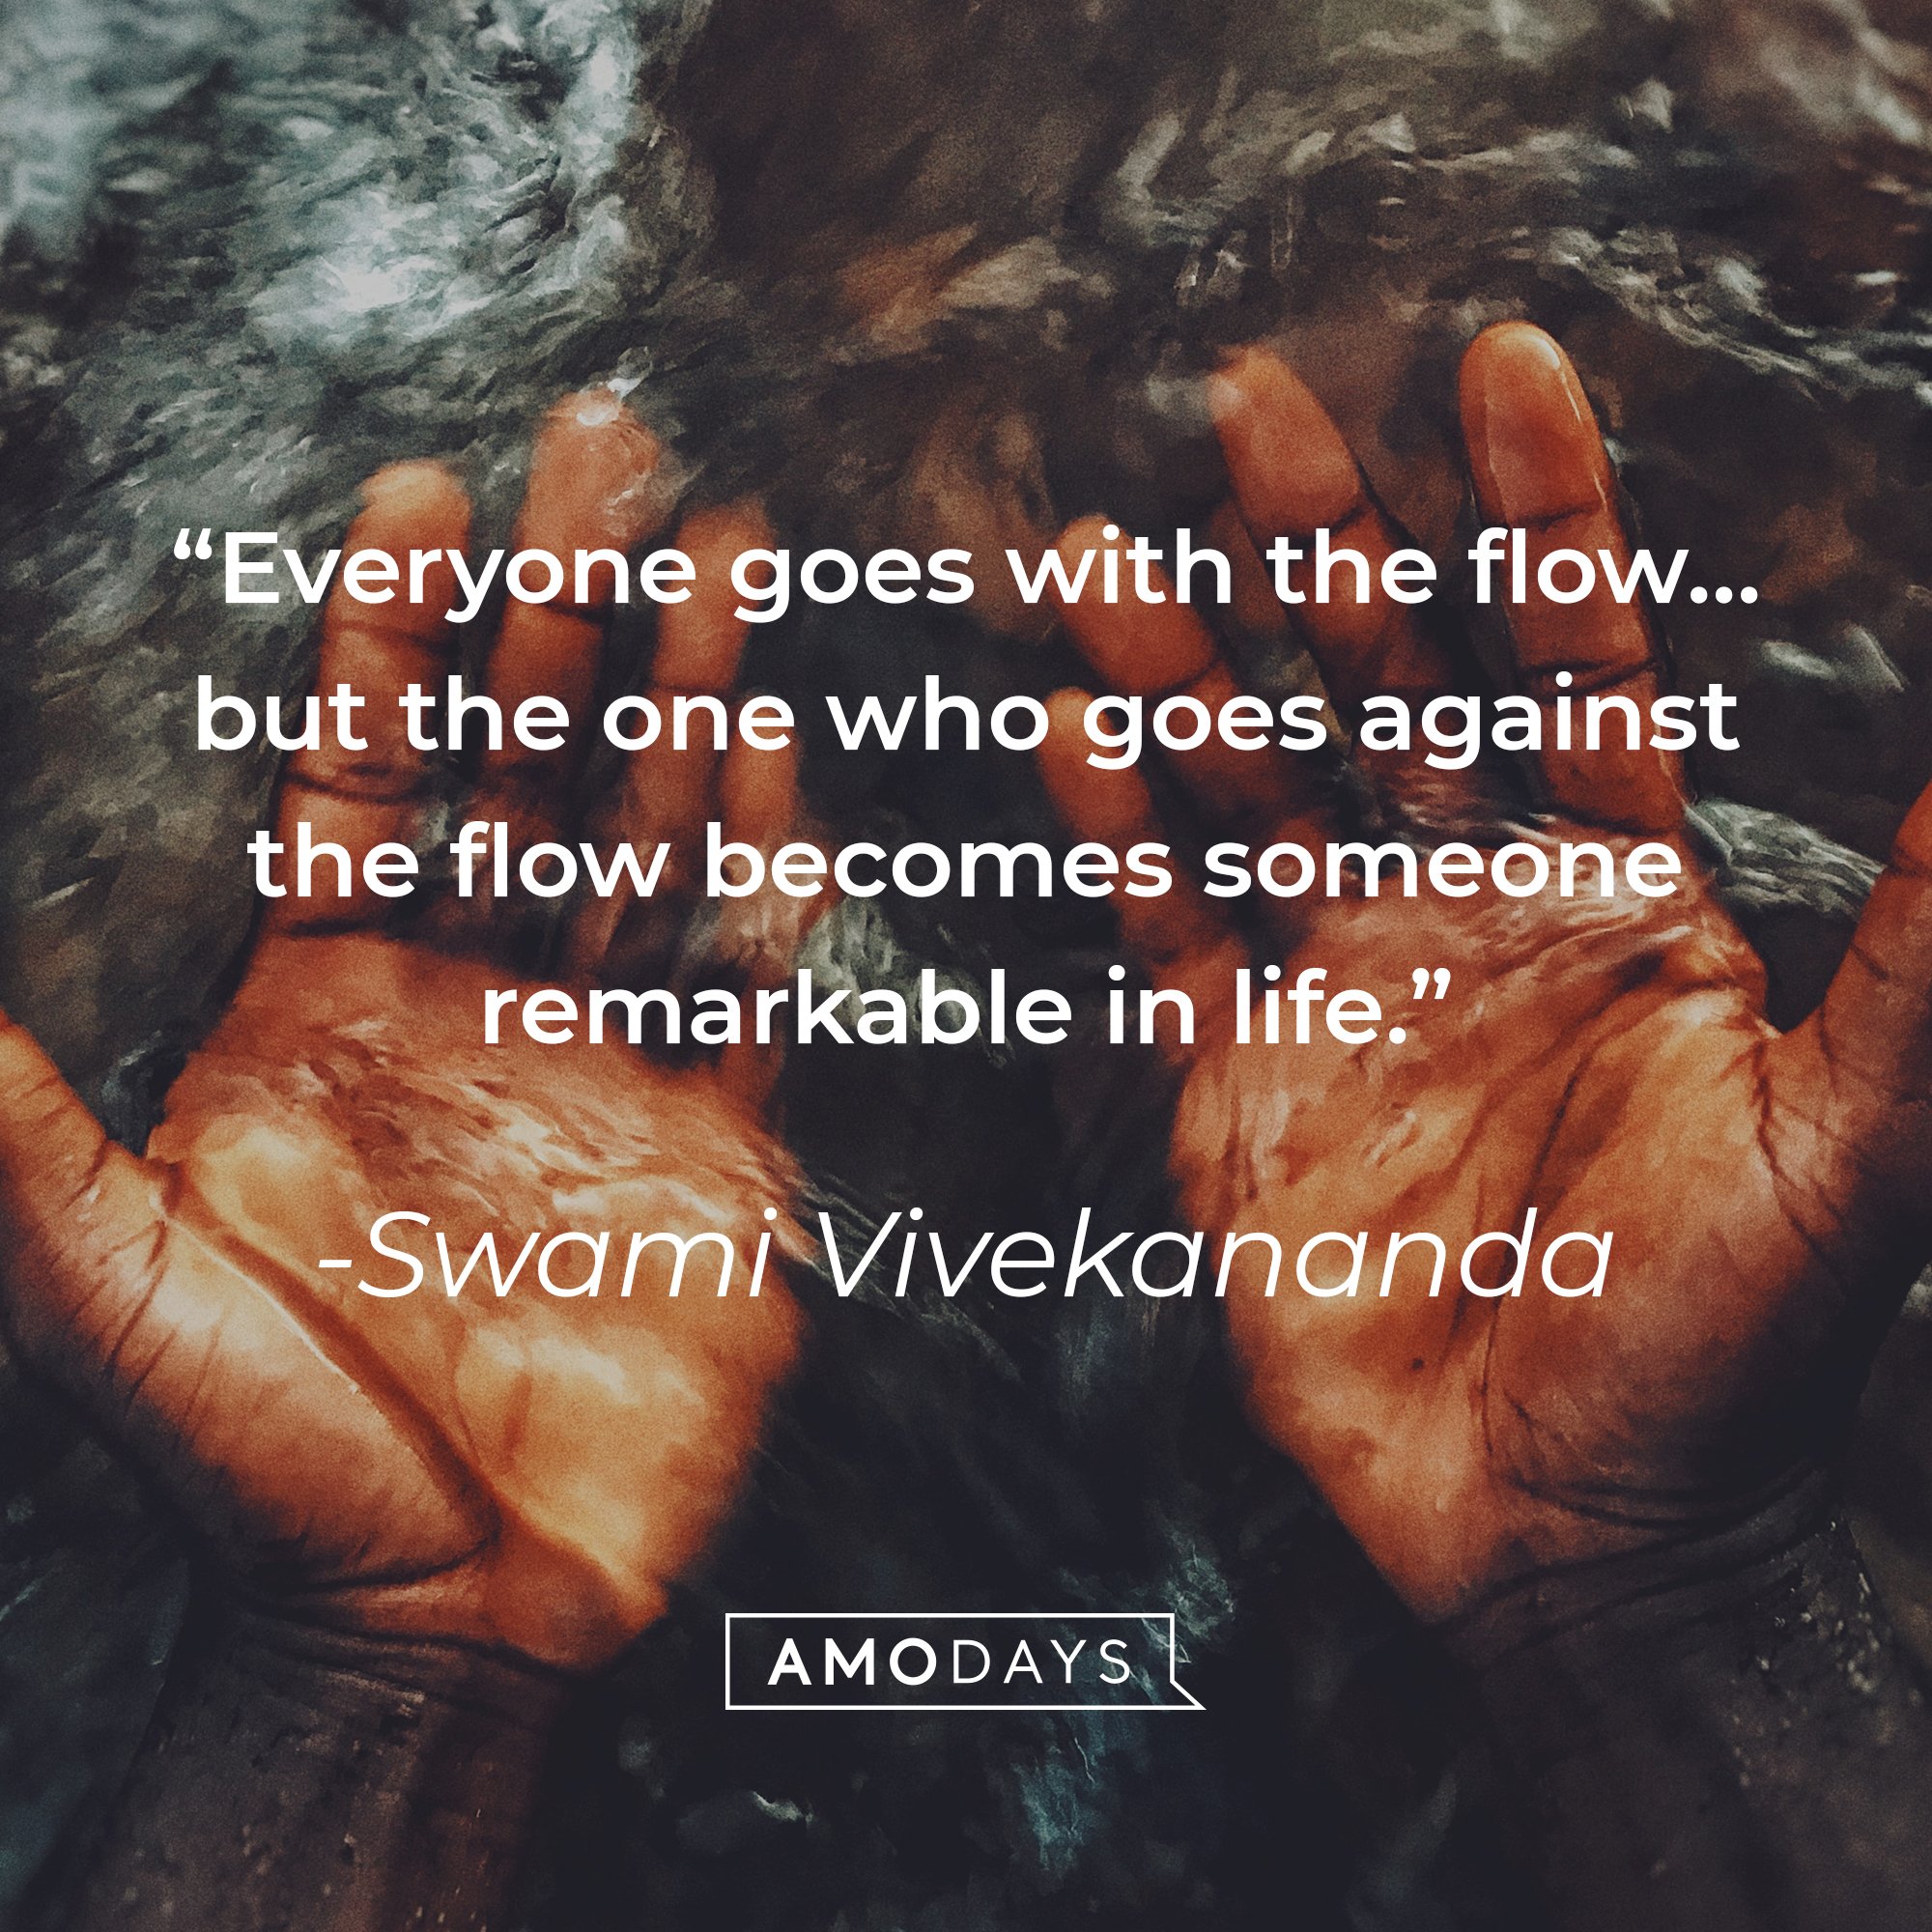 Swami Vivekananda's quote: "Everyone goes with the flow… but the one who goes against the flow becomes someone remarkable in life." | Image: AmoDays